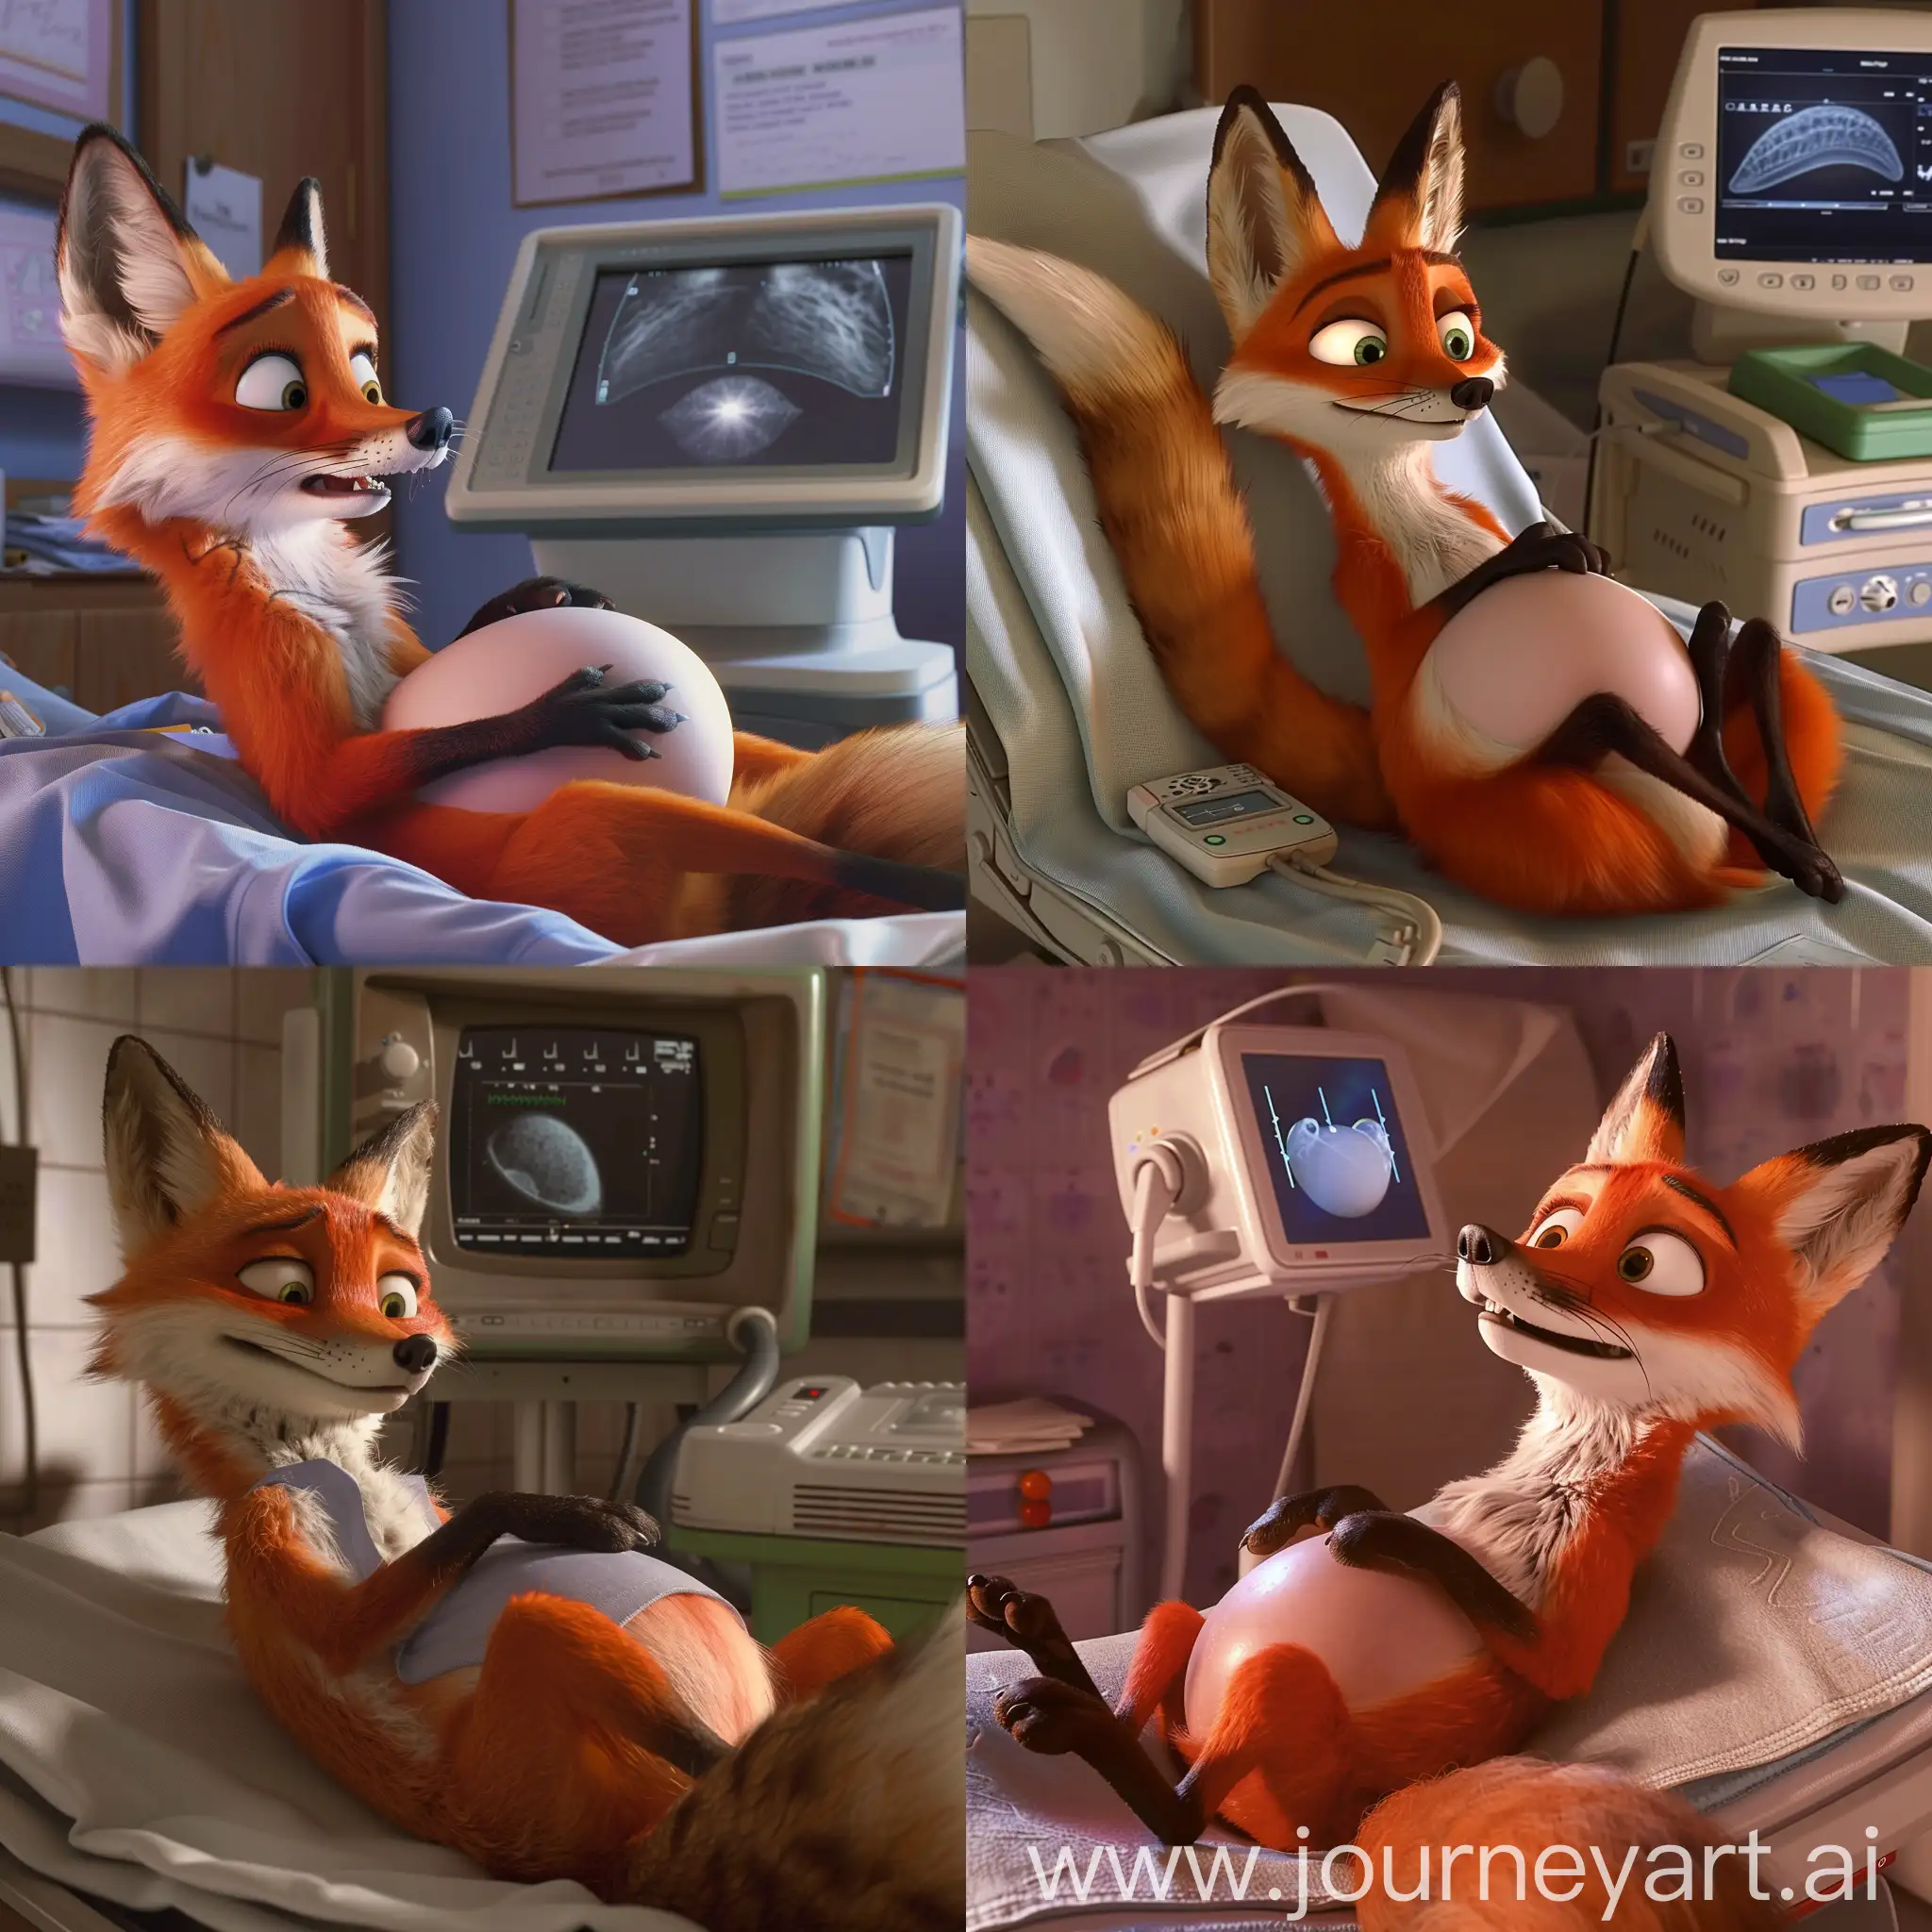 Anxious-Pregnant-Fox-Undergoes-Ultrasound-in-PixarStyle-Animation